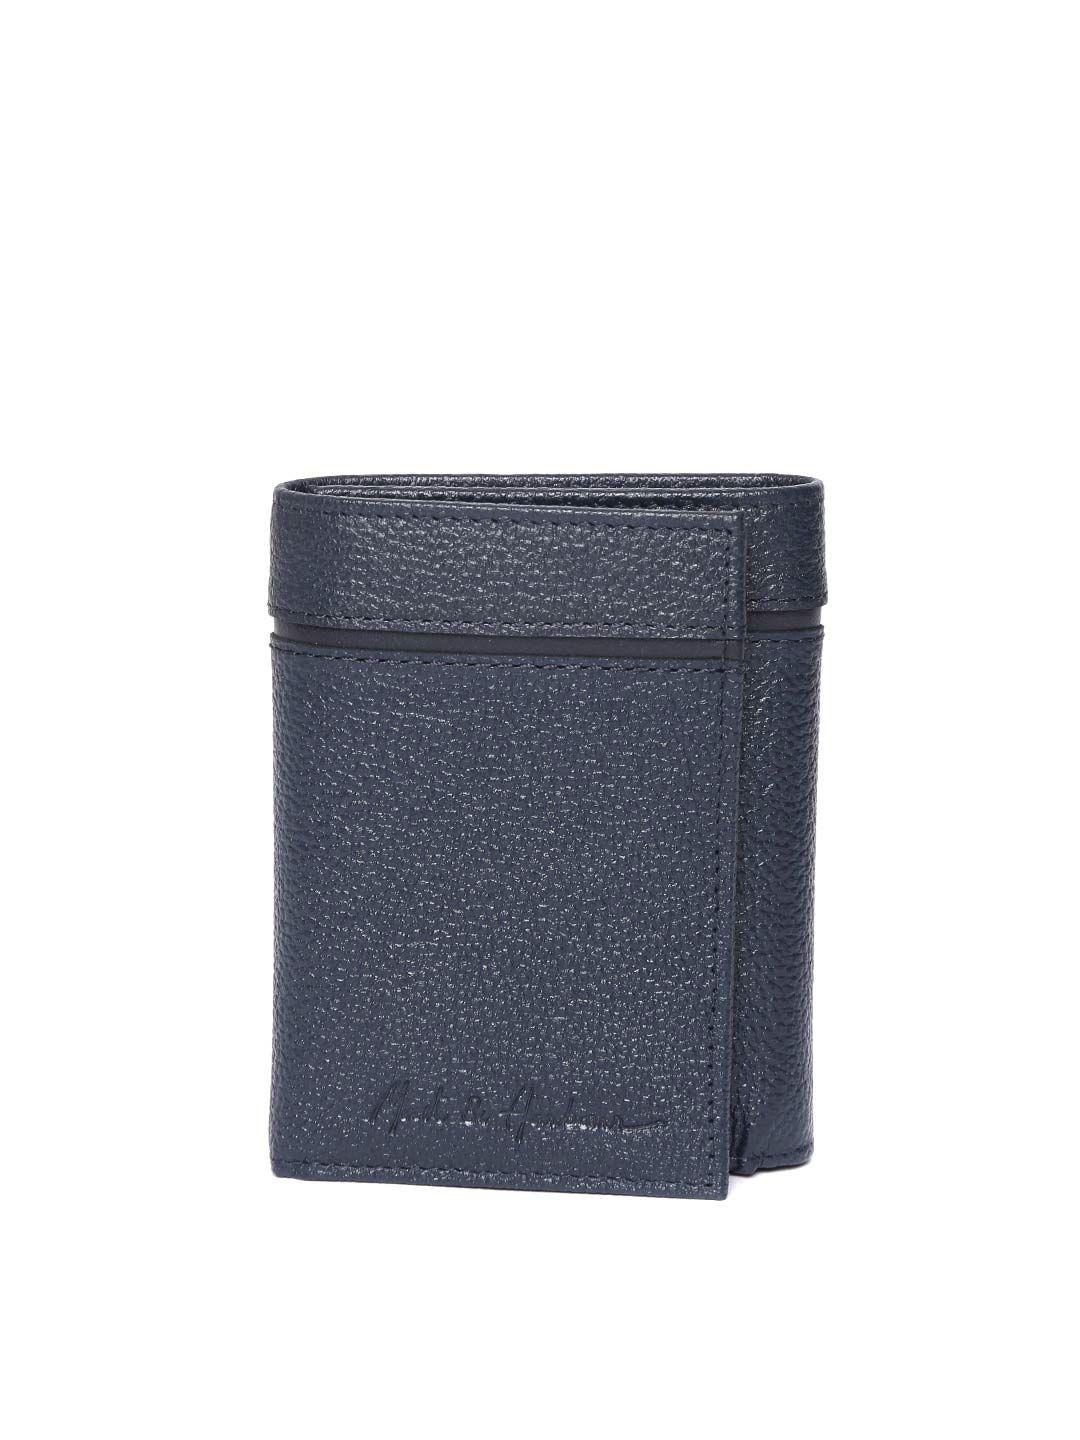 mast & harbour men navy blue solid leather three fold wallet